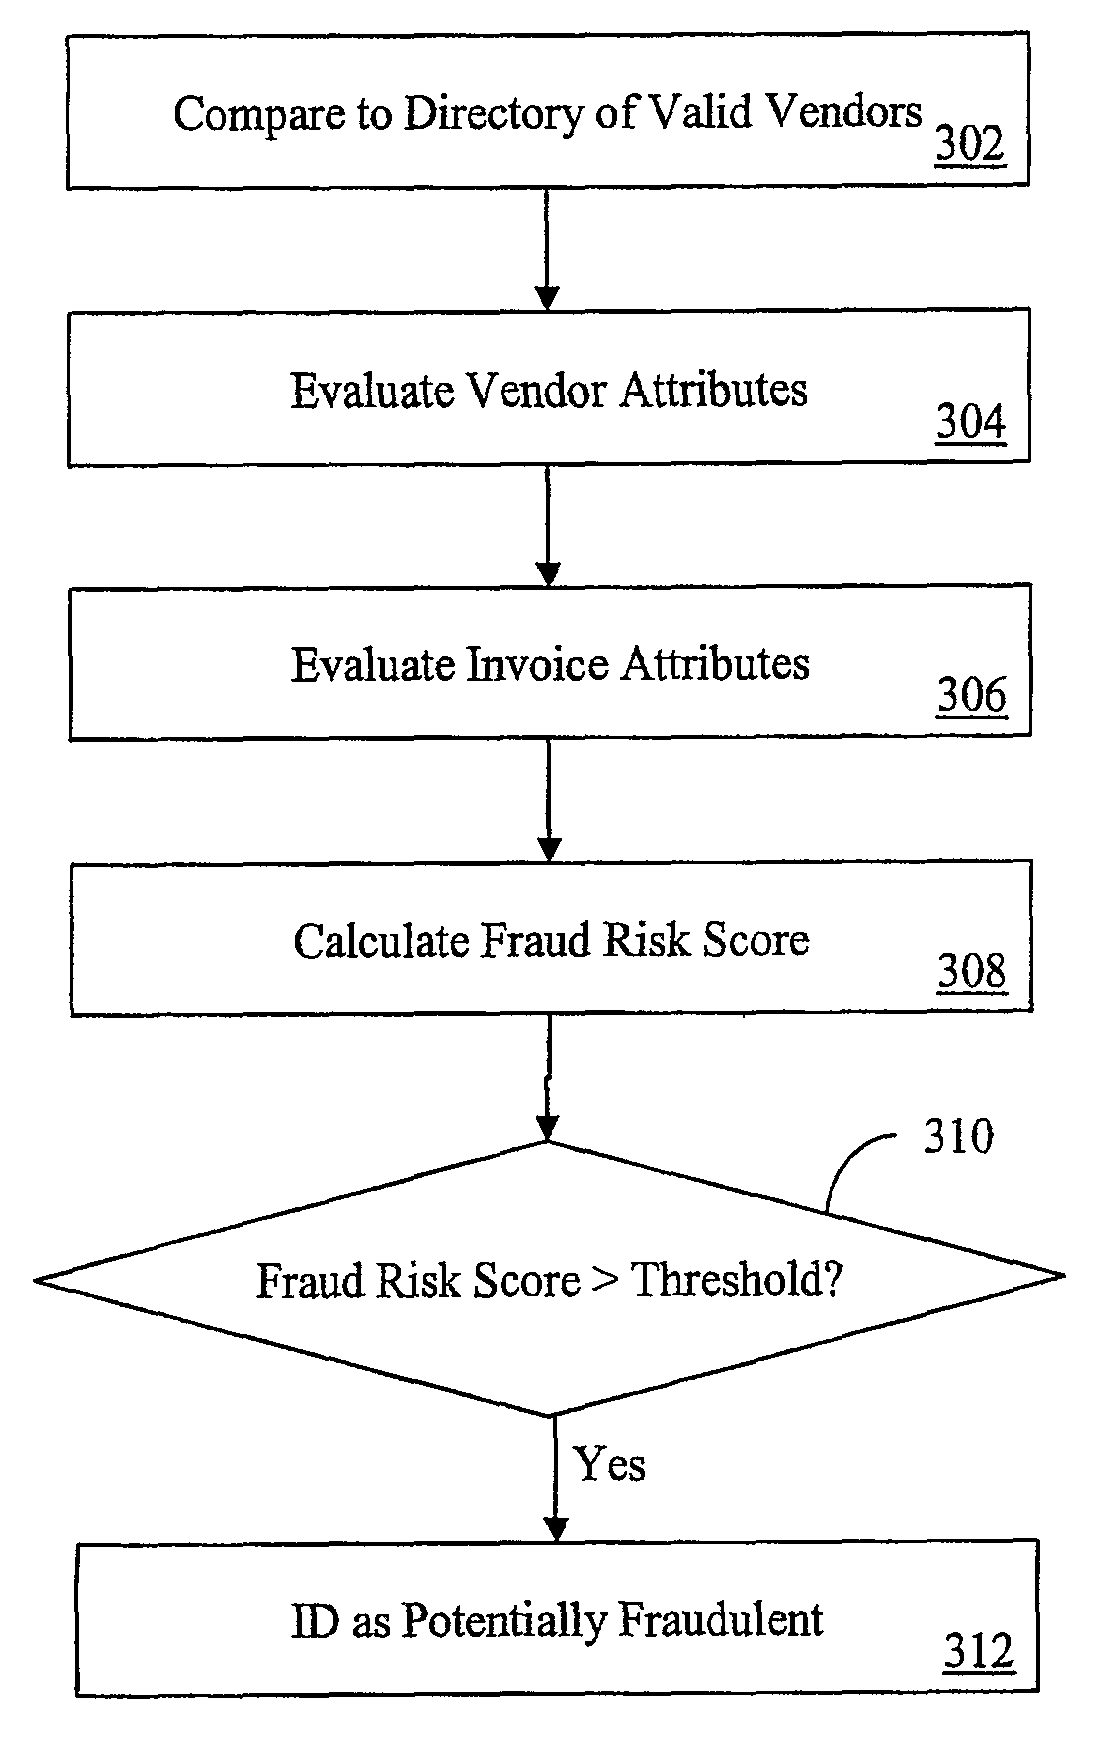 Systems and methods for automated vendor risk analysis